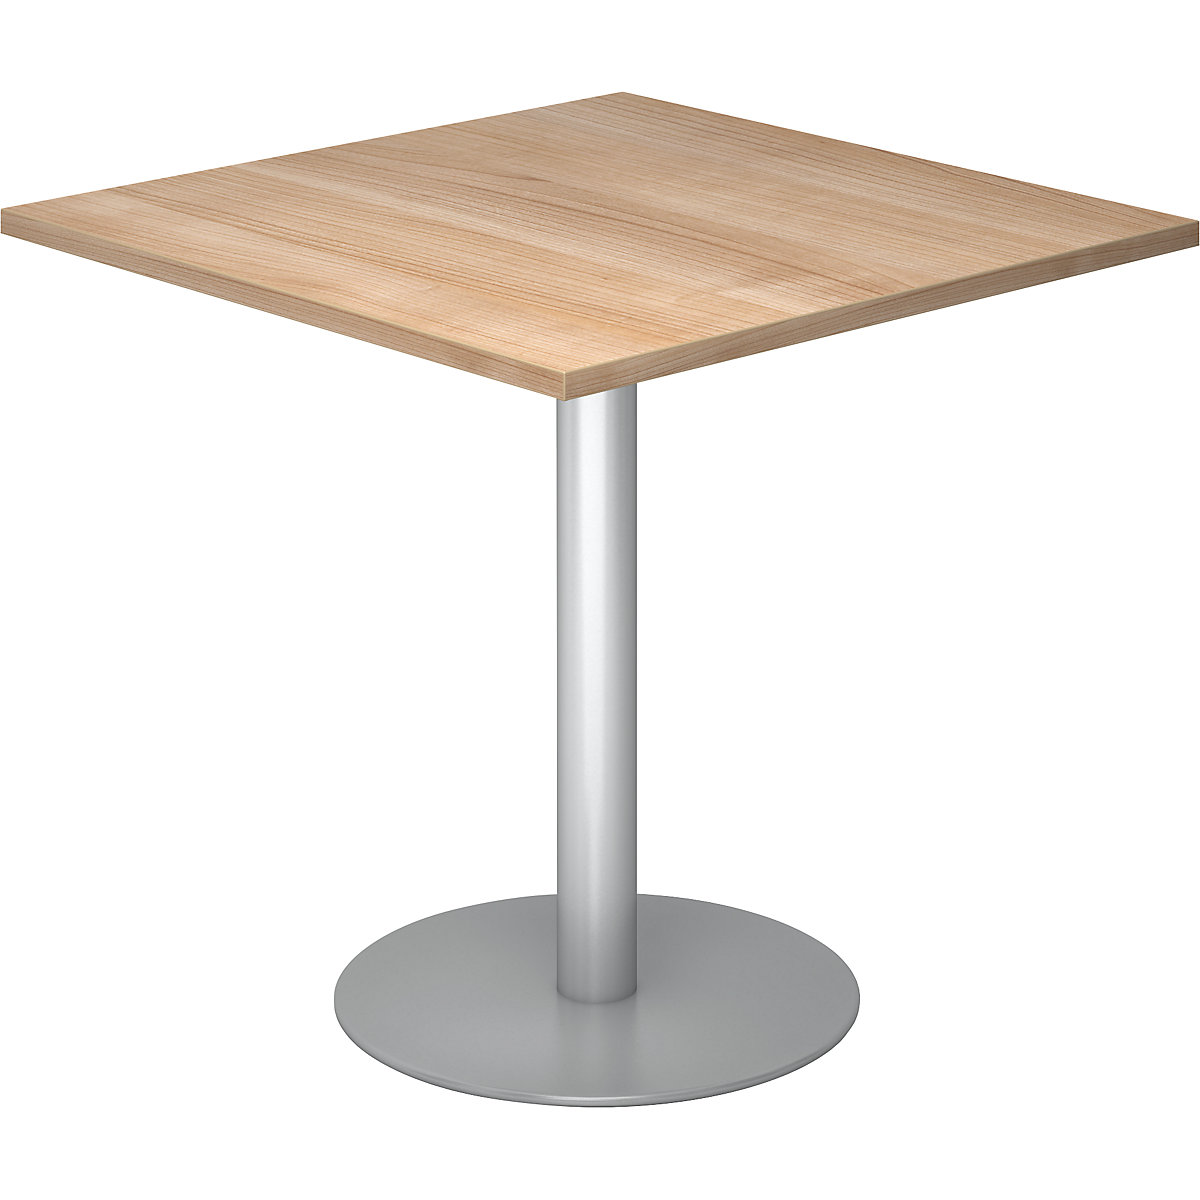 Conference table, LxW 800 x 800 mm, 755 mm high, silver frame, tabletop in walnut finish-4